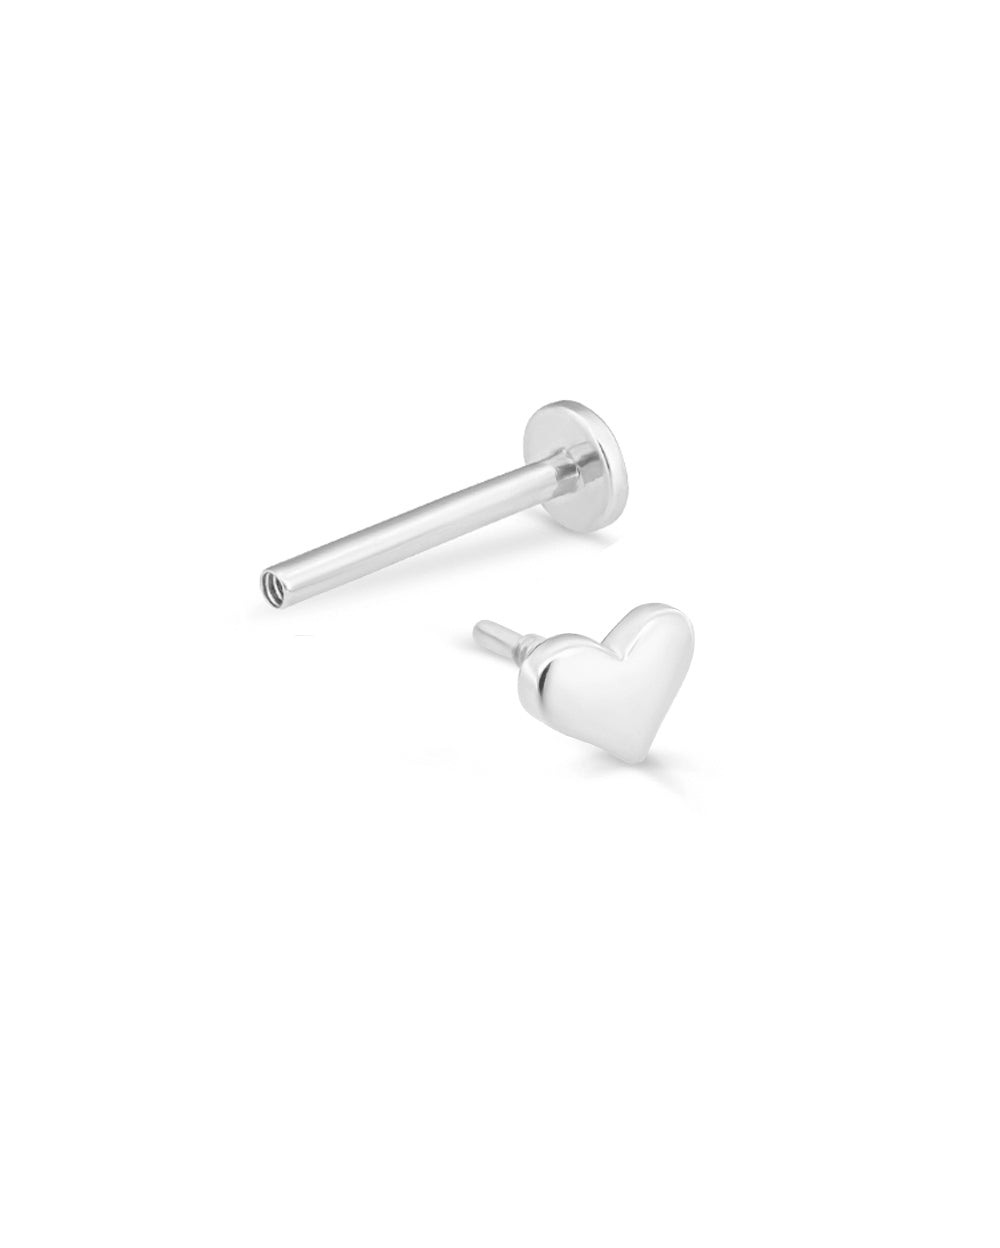 Covetear Classic Sweet Heart Cartilage Earring#material_14k_White_Gold